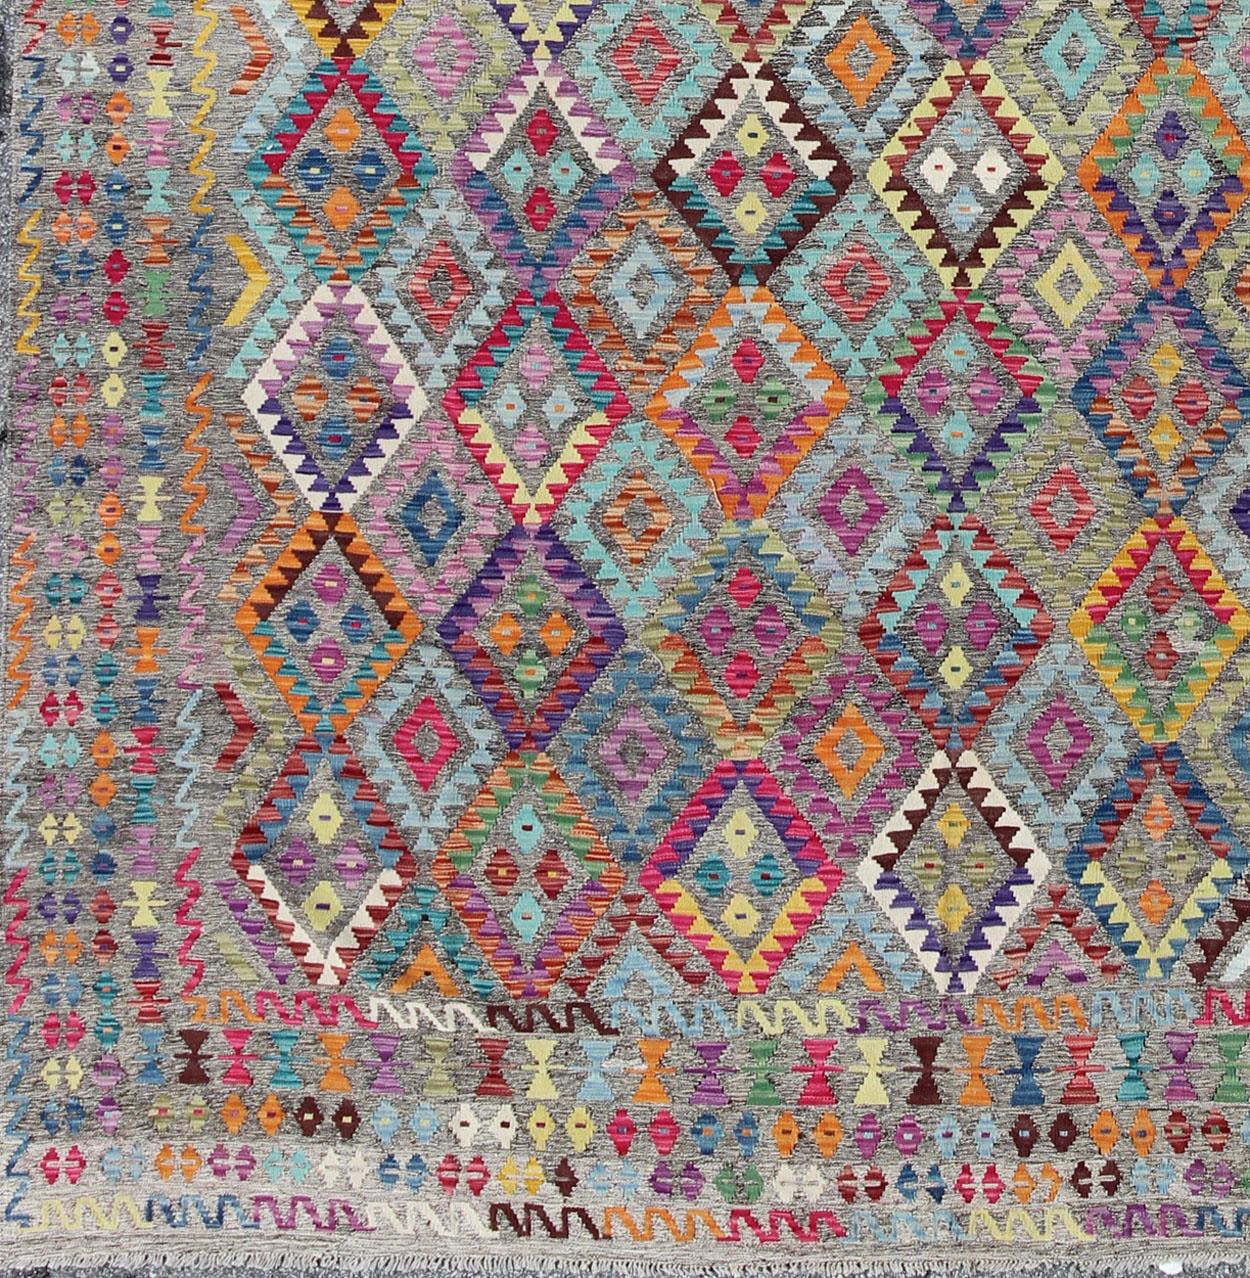 Hand-Woven Colorful 21st Century Afghan Kilim Flat Weave Rug in Diamond Design